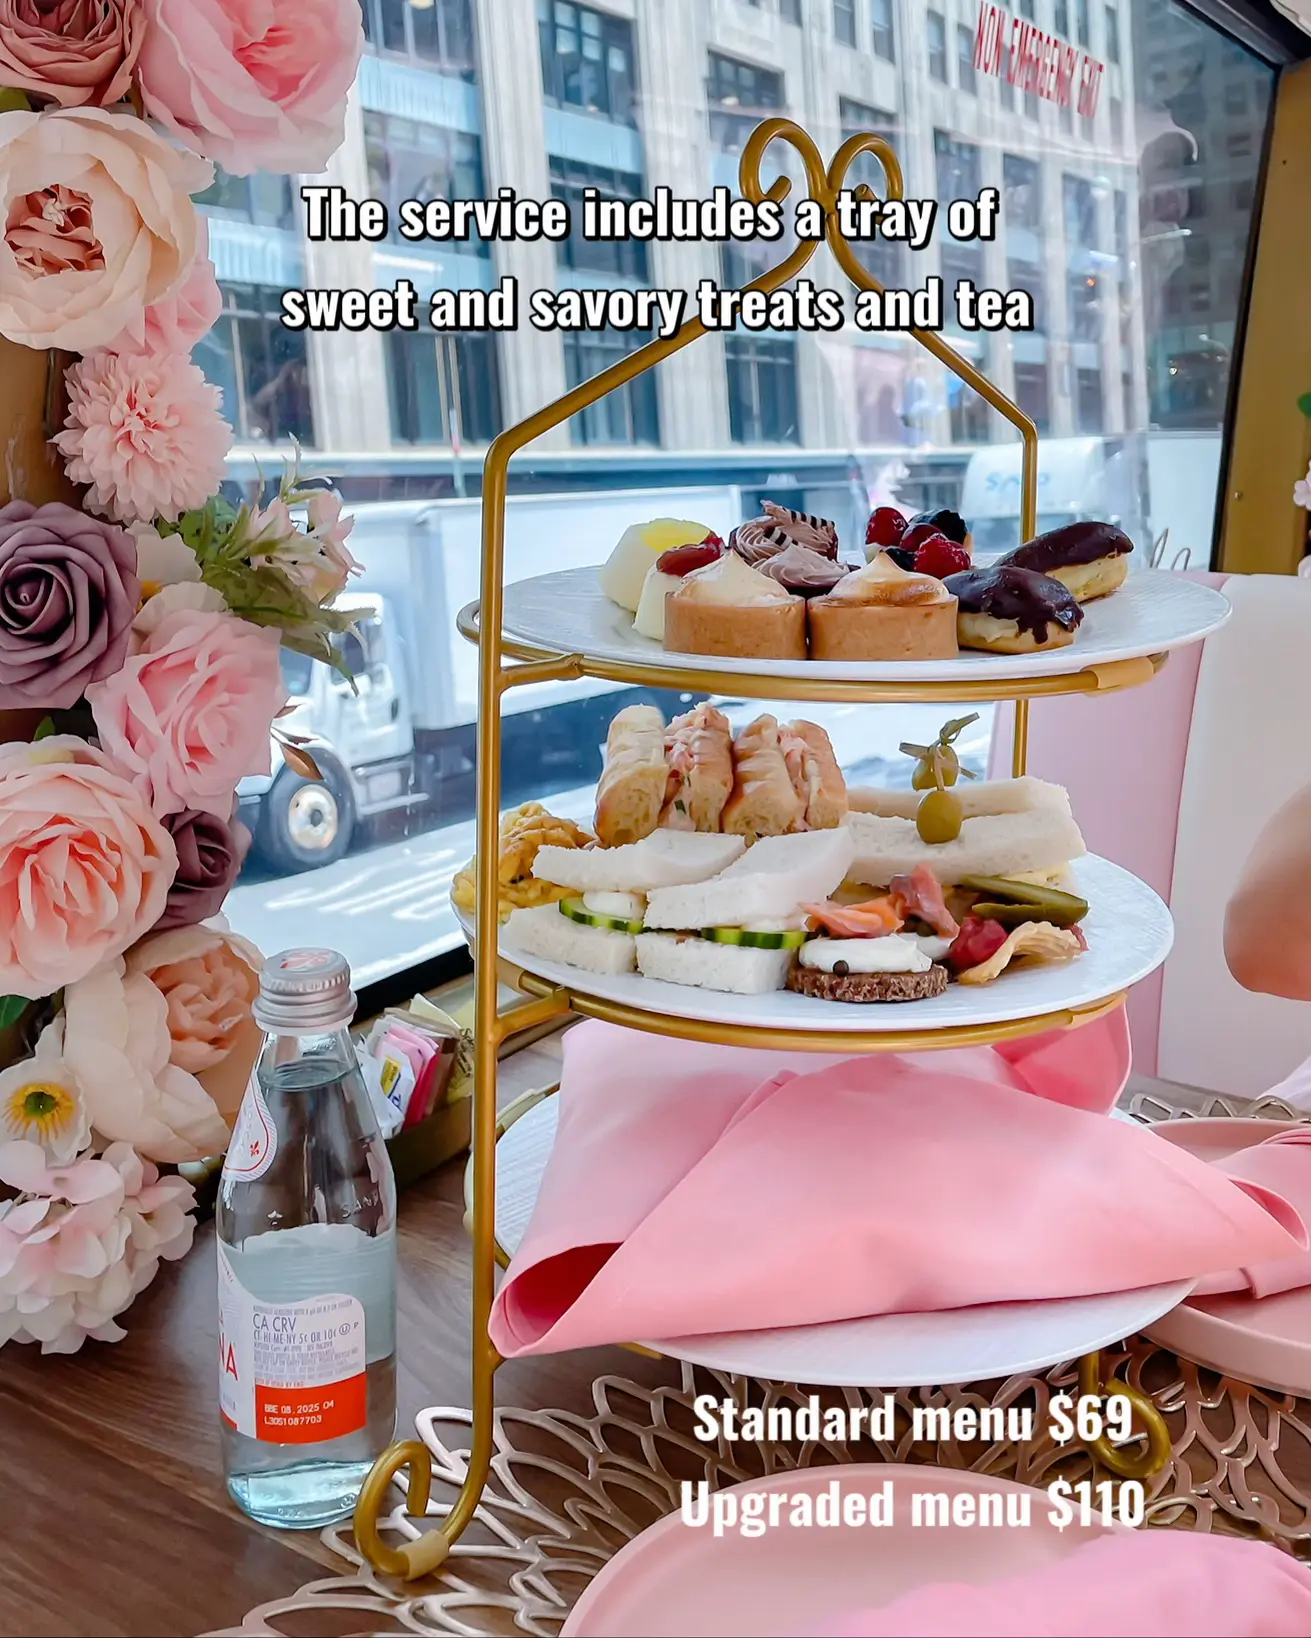  A tray of sweet and savory treats and tea are served on a table.